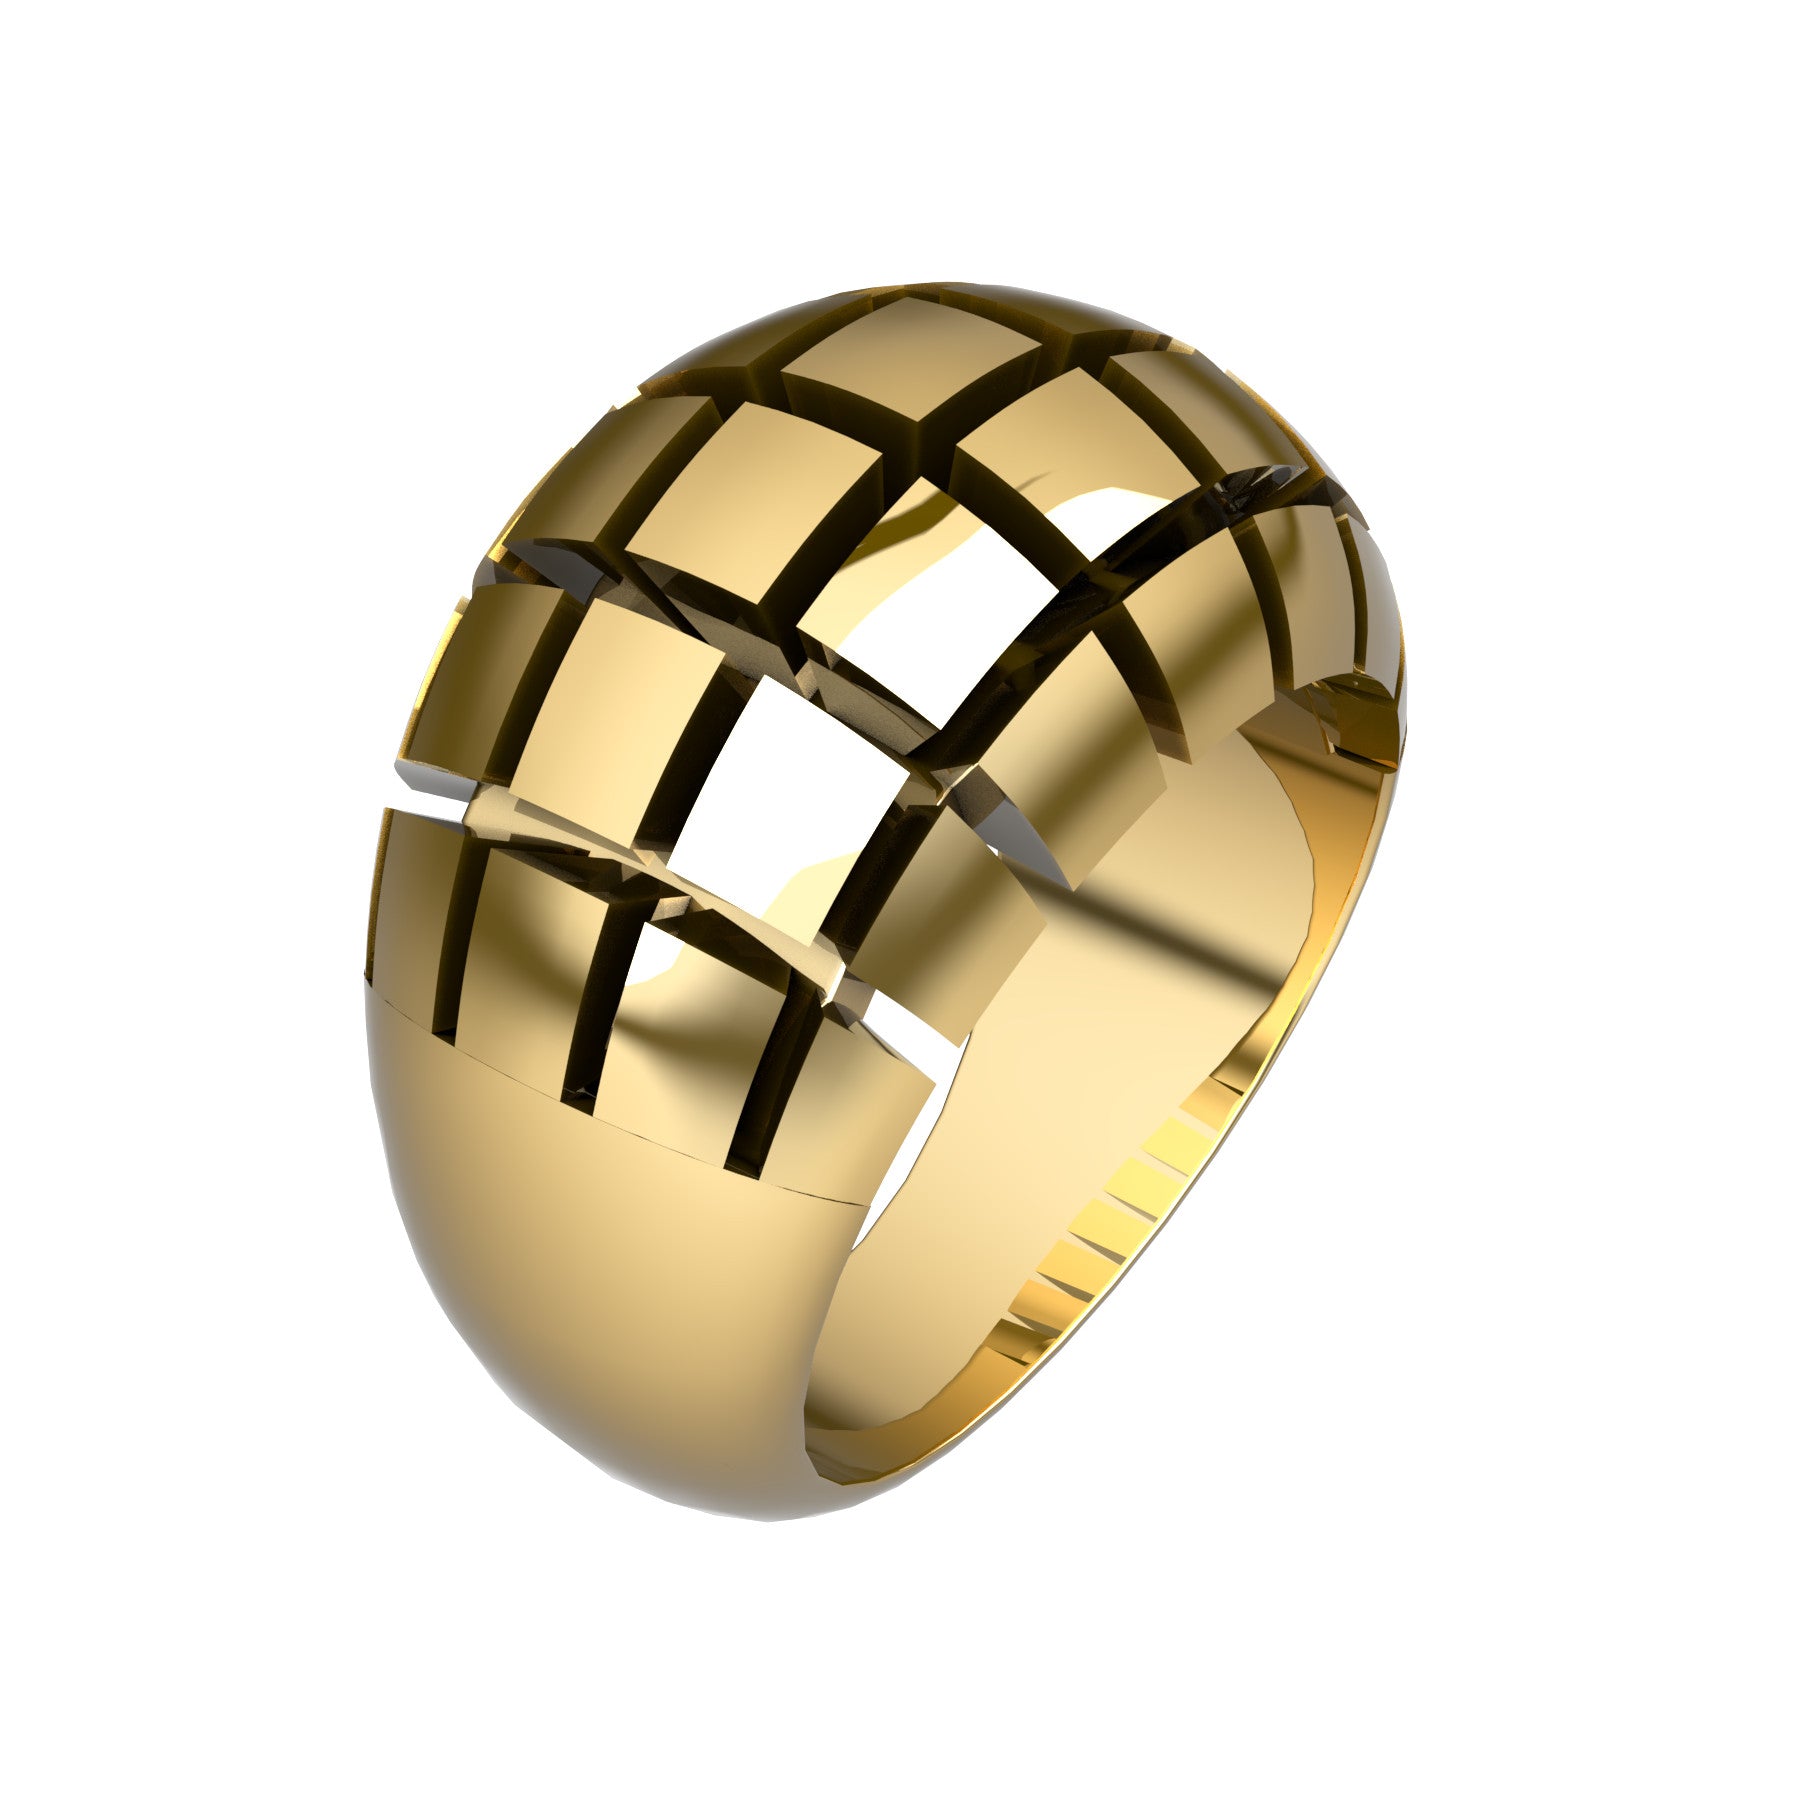 split 5 ring, 18 K yellow gold, weight about 18,5 g. (0.65 oz), width 13,3 mm max